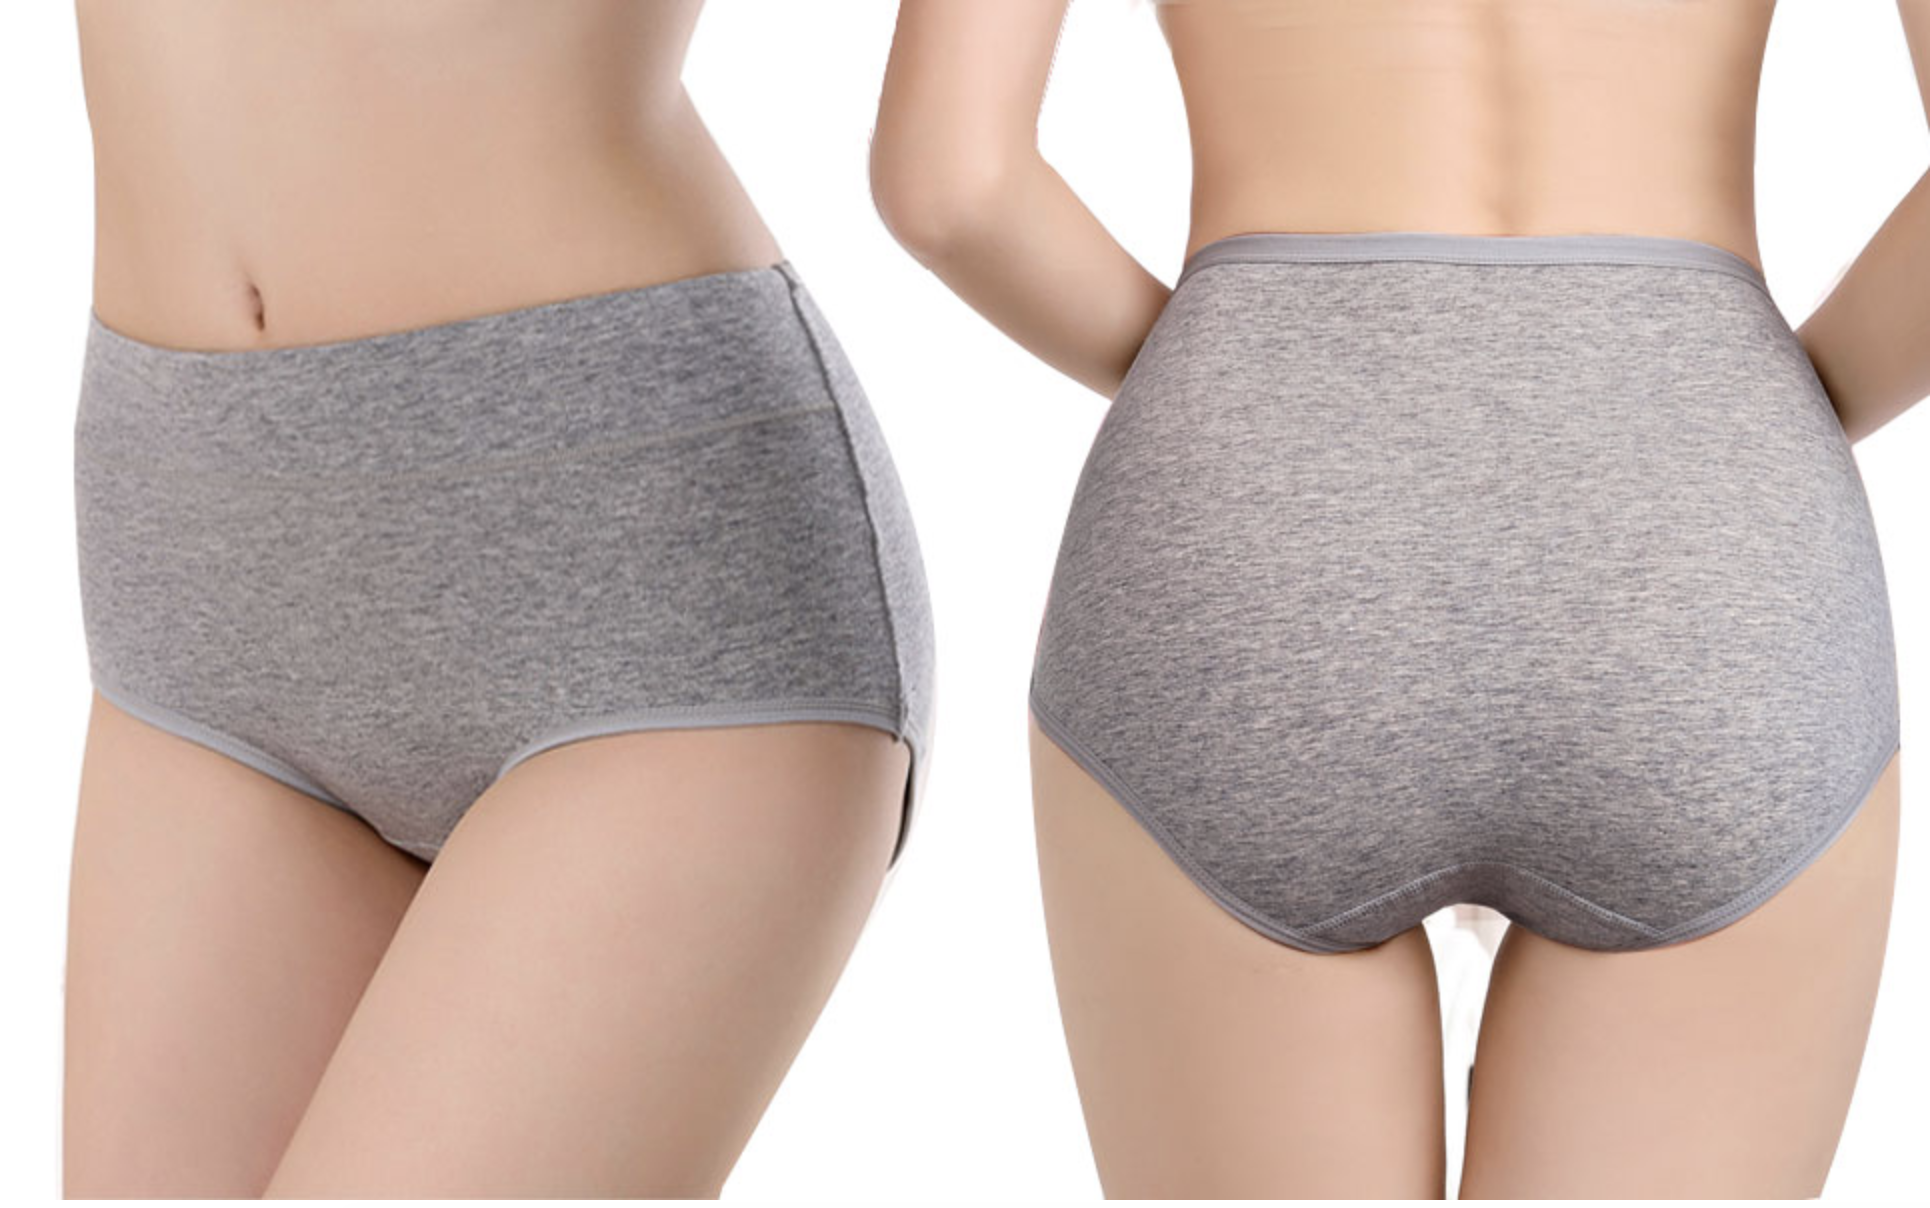 Someone wearing a pair of underwear with full coverage from two angles, the front and the rear 